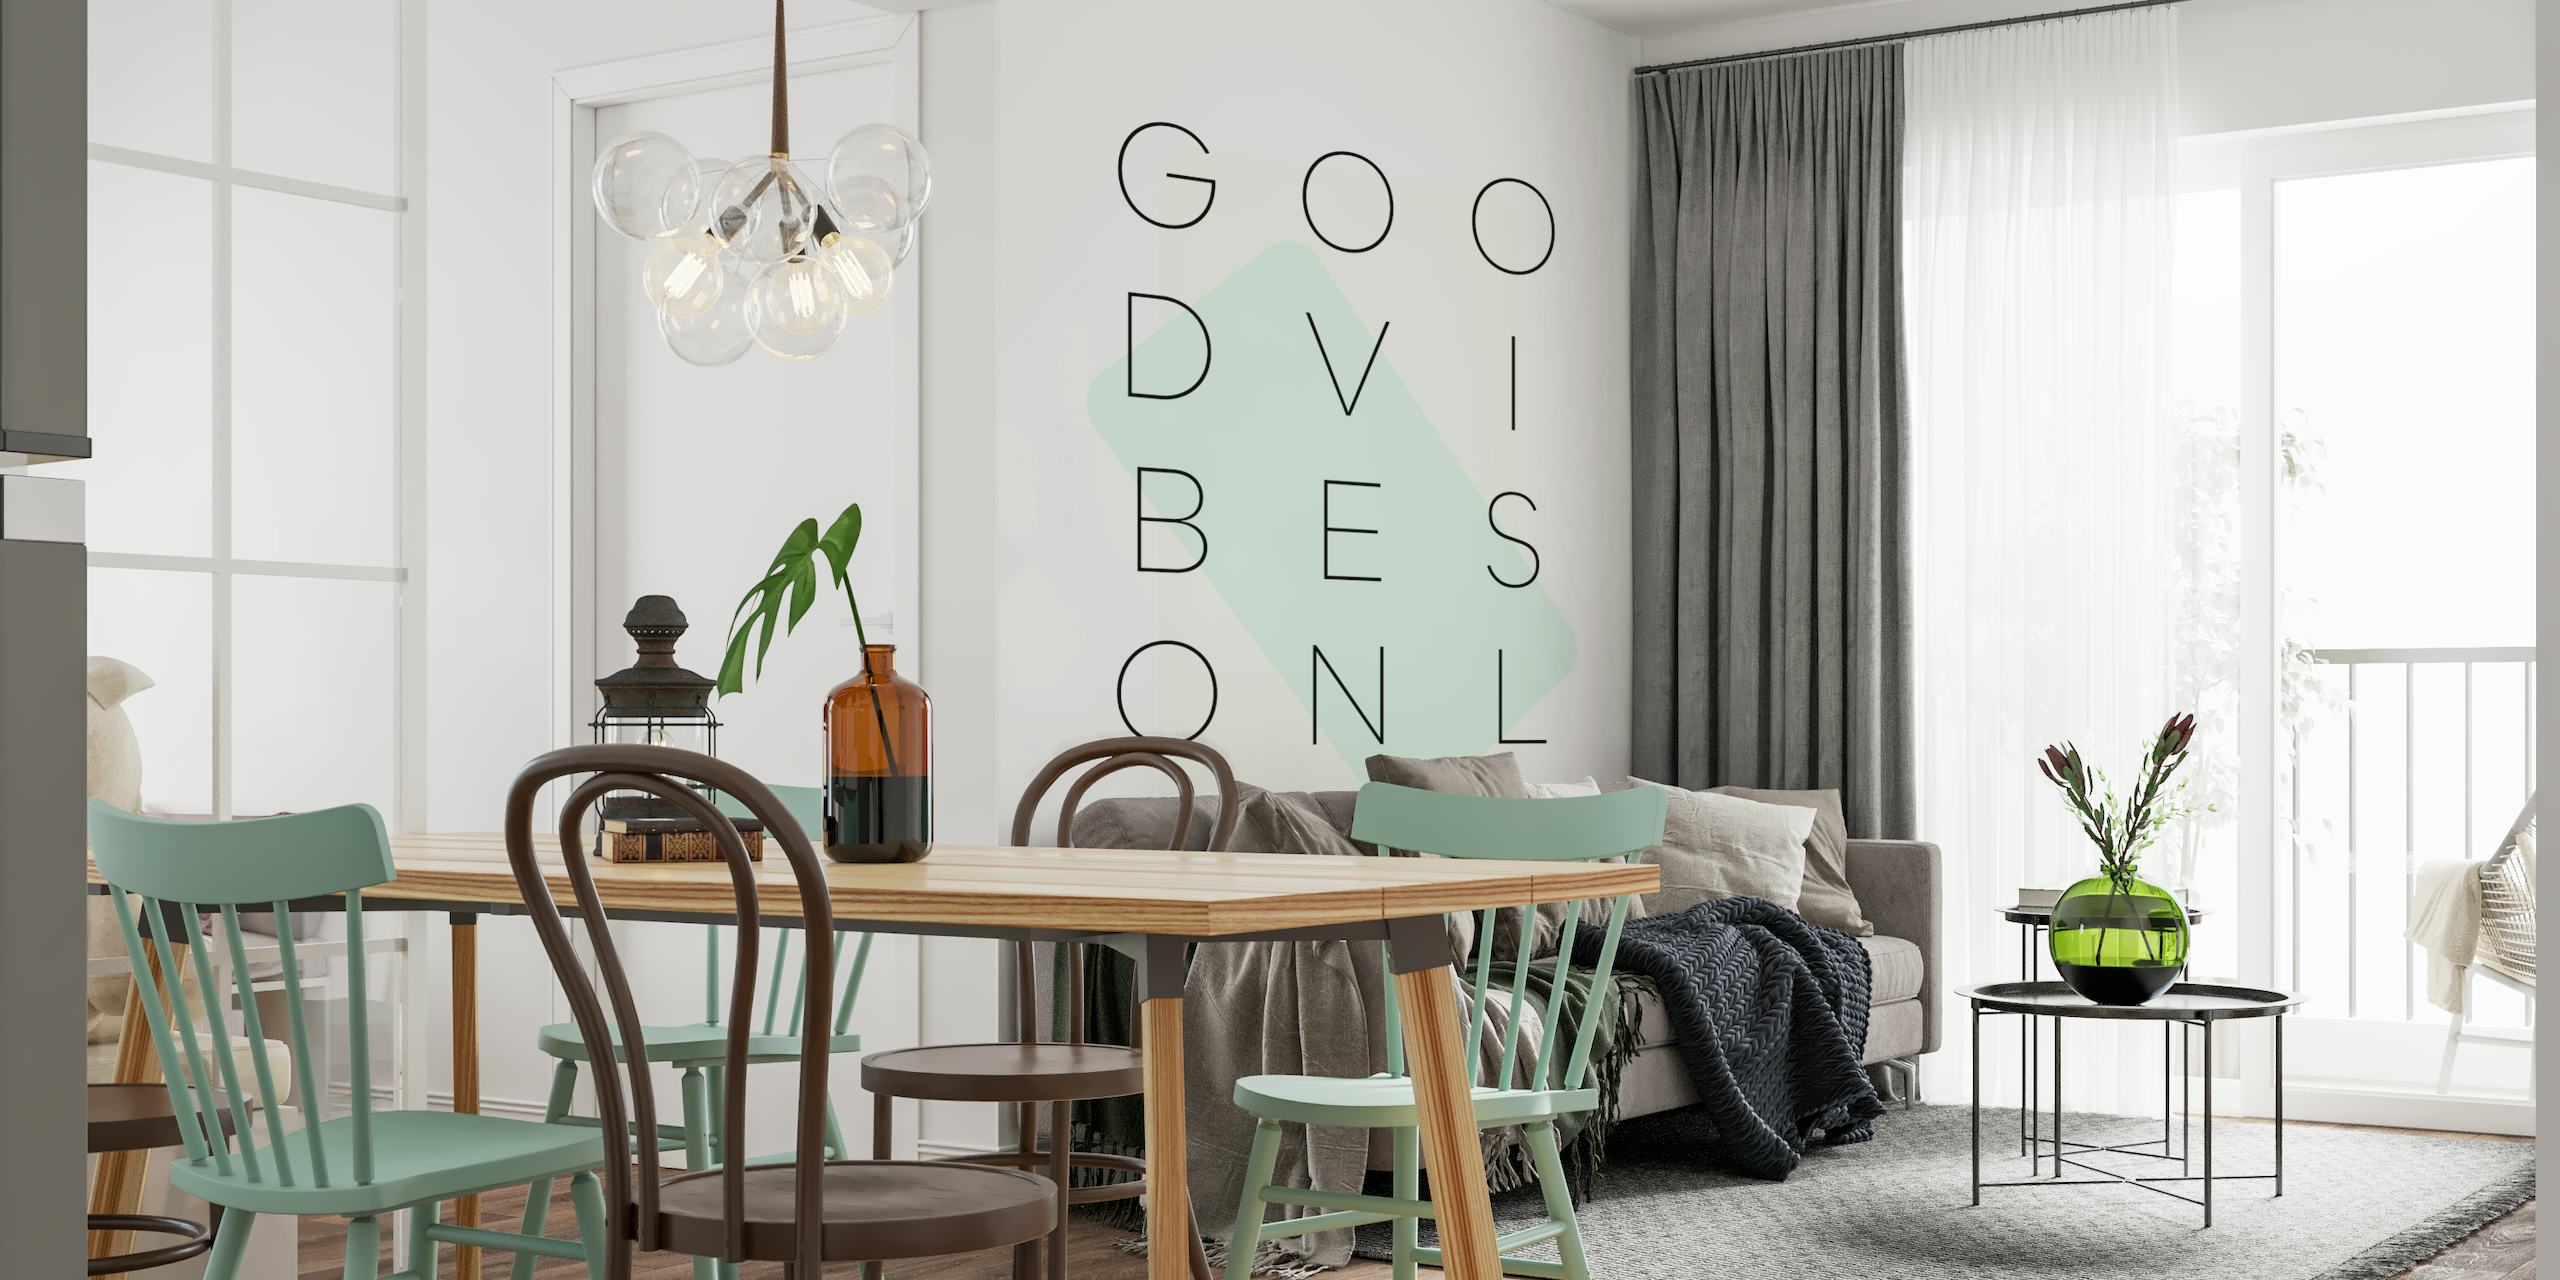 Good vibes only - turquoise papiers peint